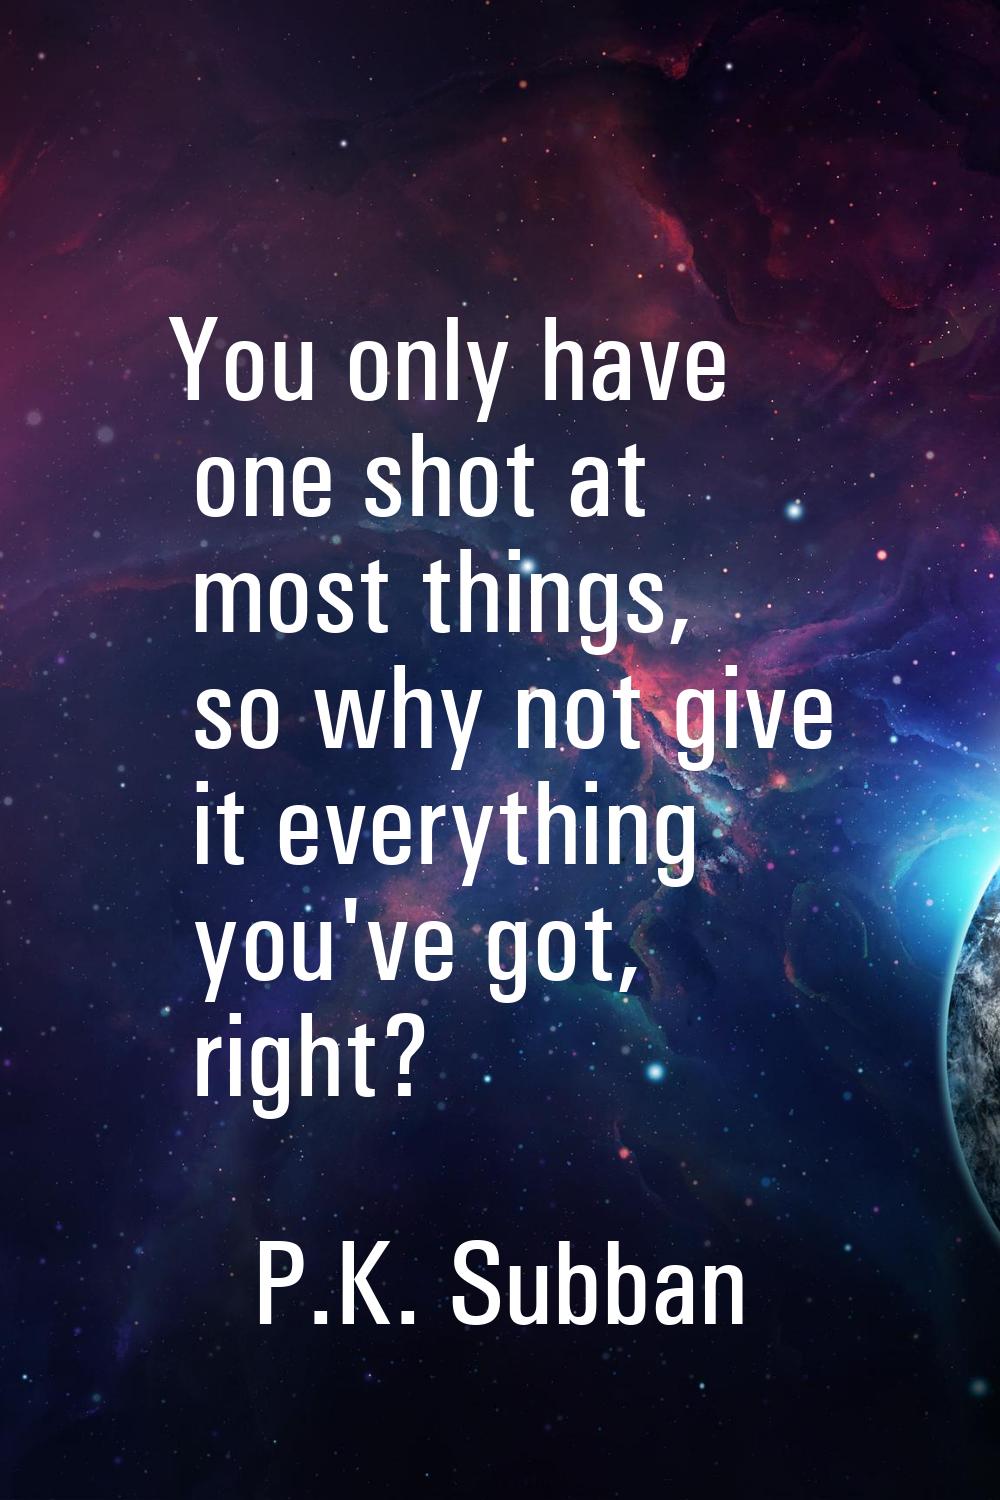 You only have one shot at most things, so why not give it everything you've got, right?